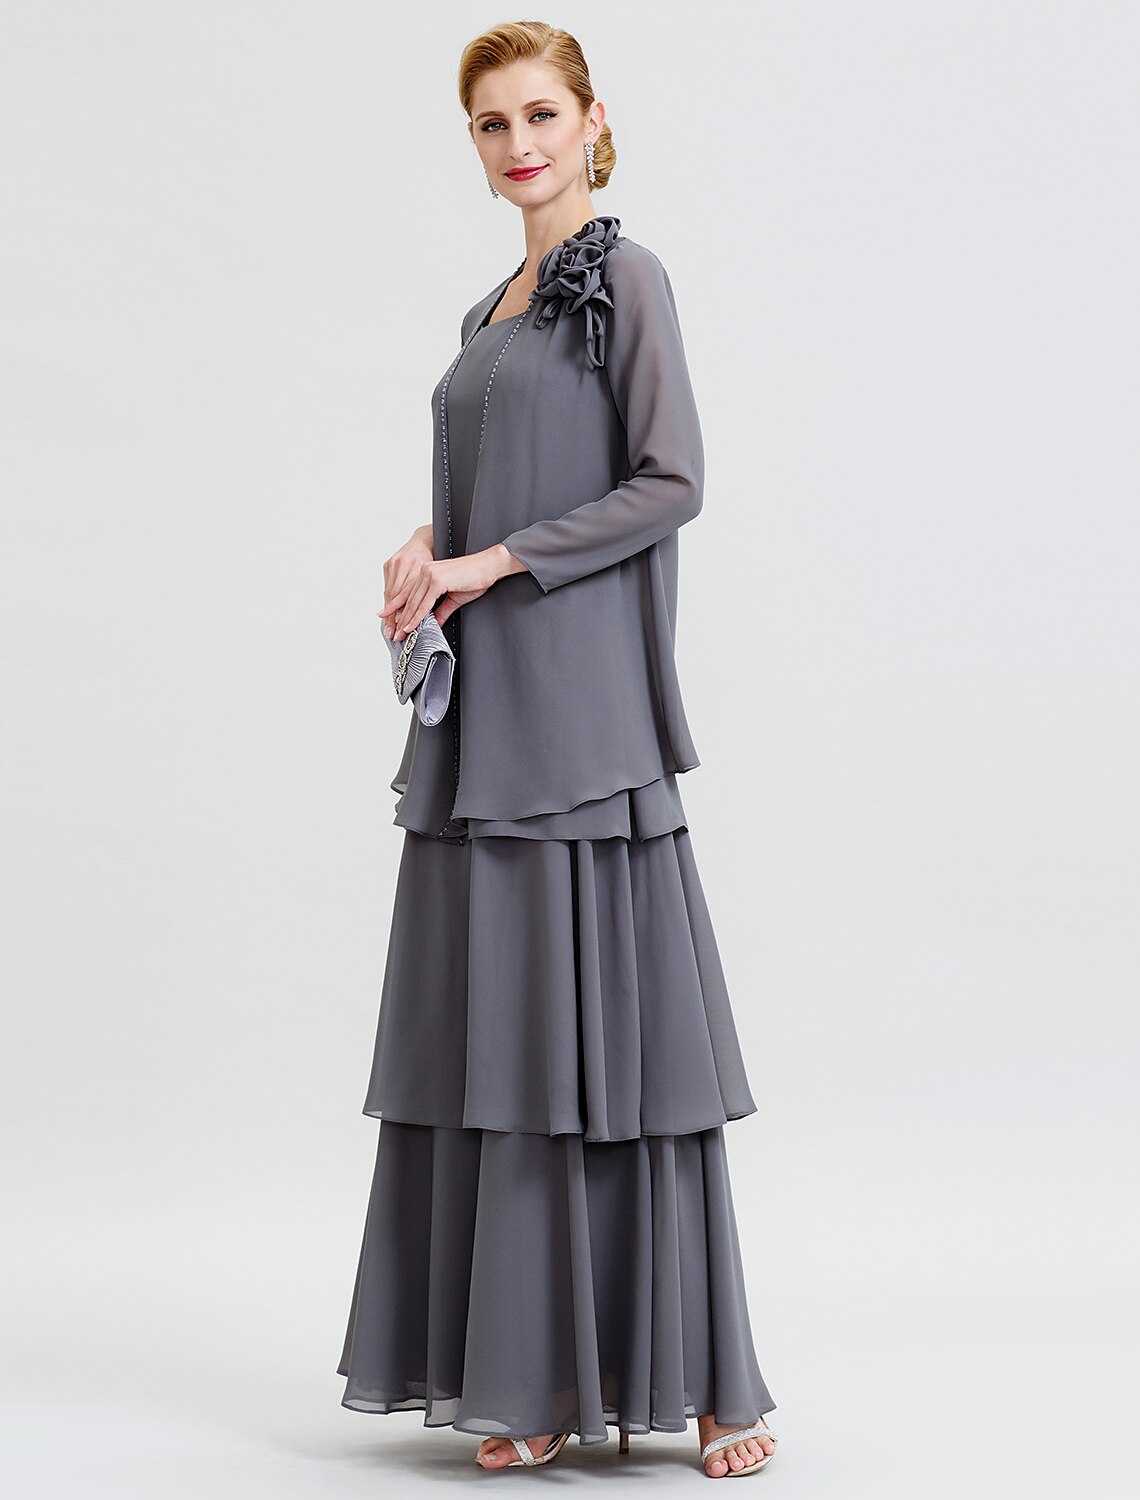 A-Line Mother of the Bride Dress Formal Floral Convertible Dress Scoop Neck Floor Length Chiffon Long Sleeve Wrap Included with Beading Flower Tiered